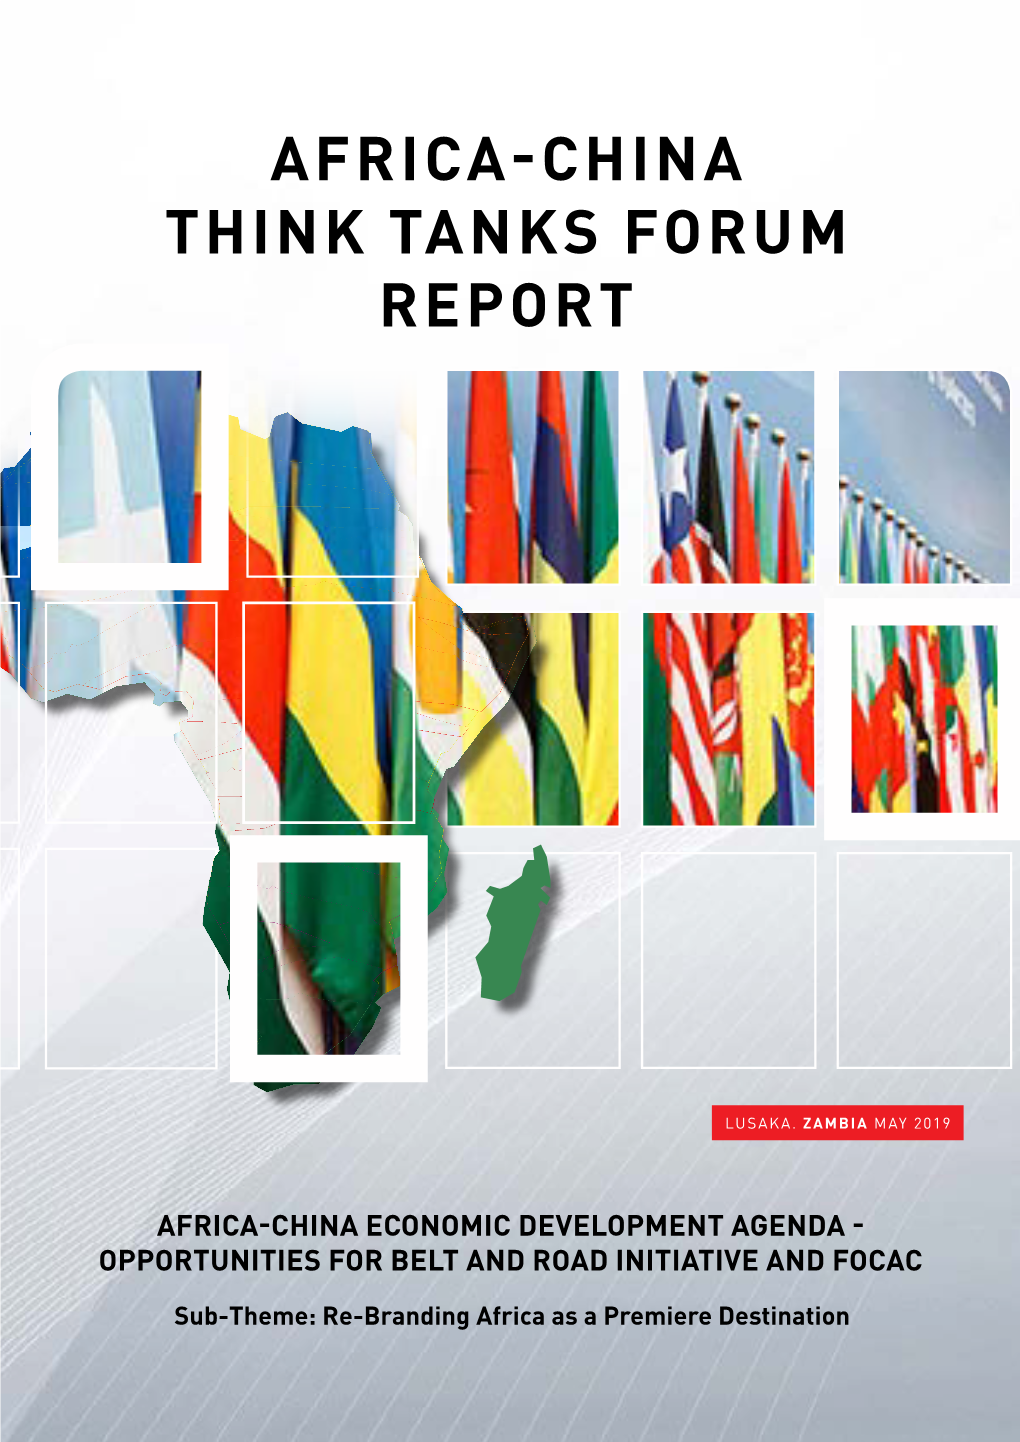 Africa-China Think Tanks Forum Report